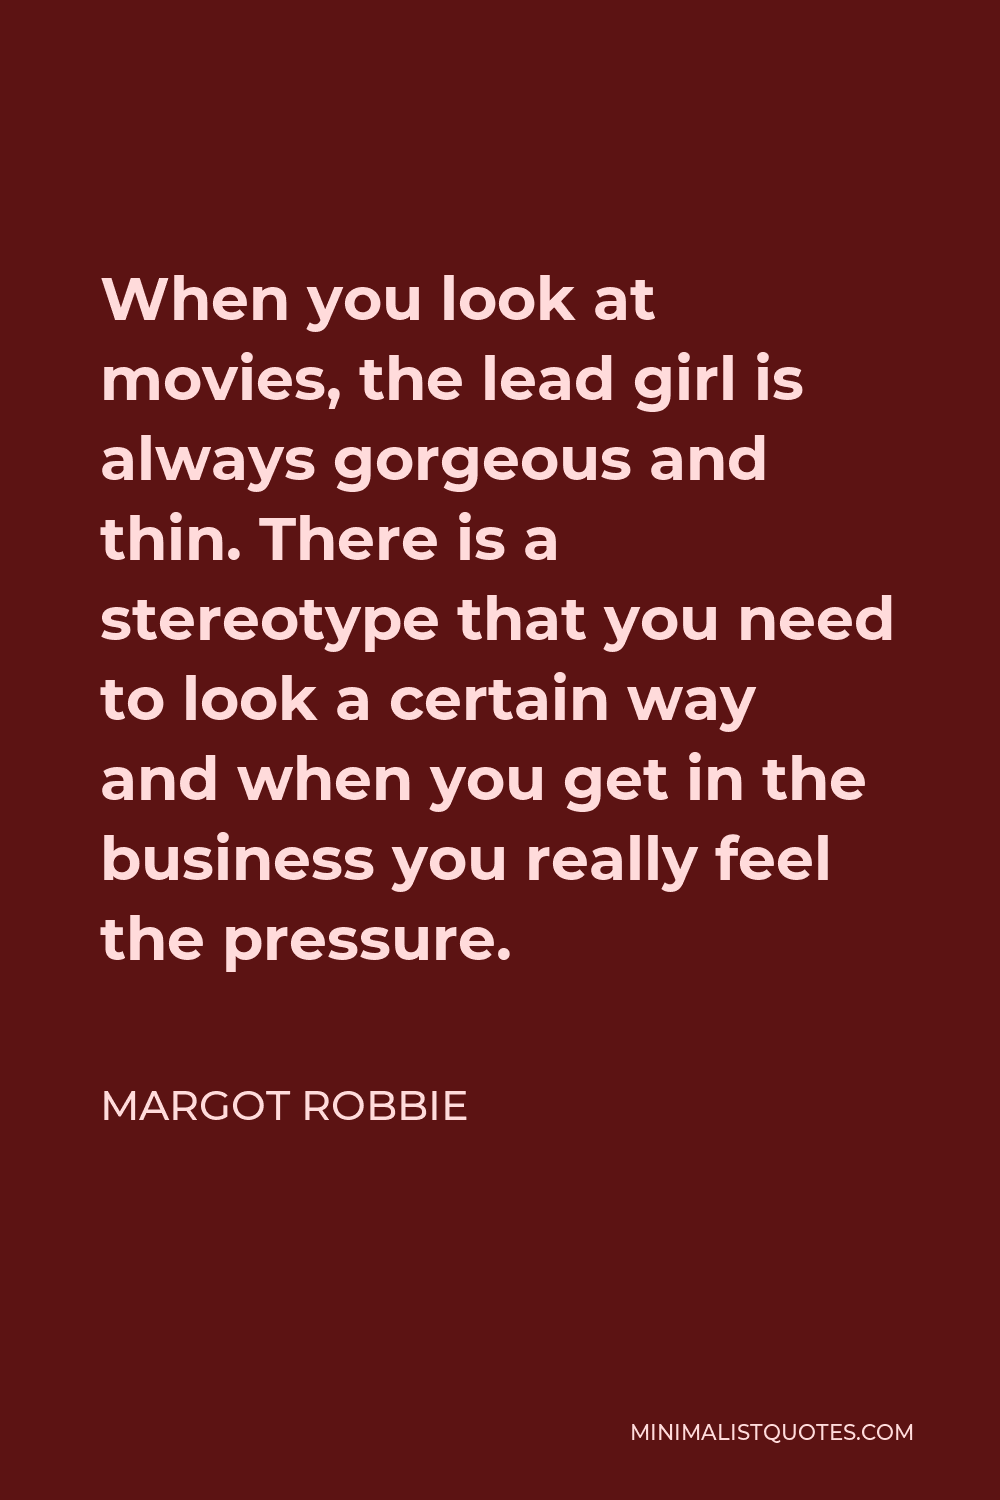 Margot Robbie Quote - When you look at movies, the lead girl is always gorgeous and thin. There is a stereotype that you need to look a certain way and when you get in the business you really feel the pressure.